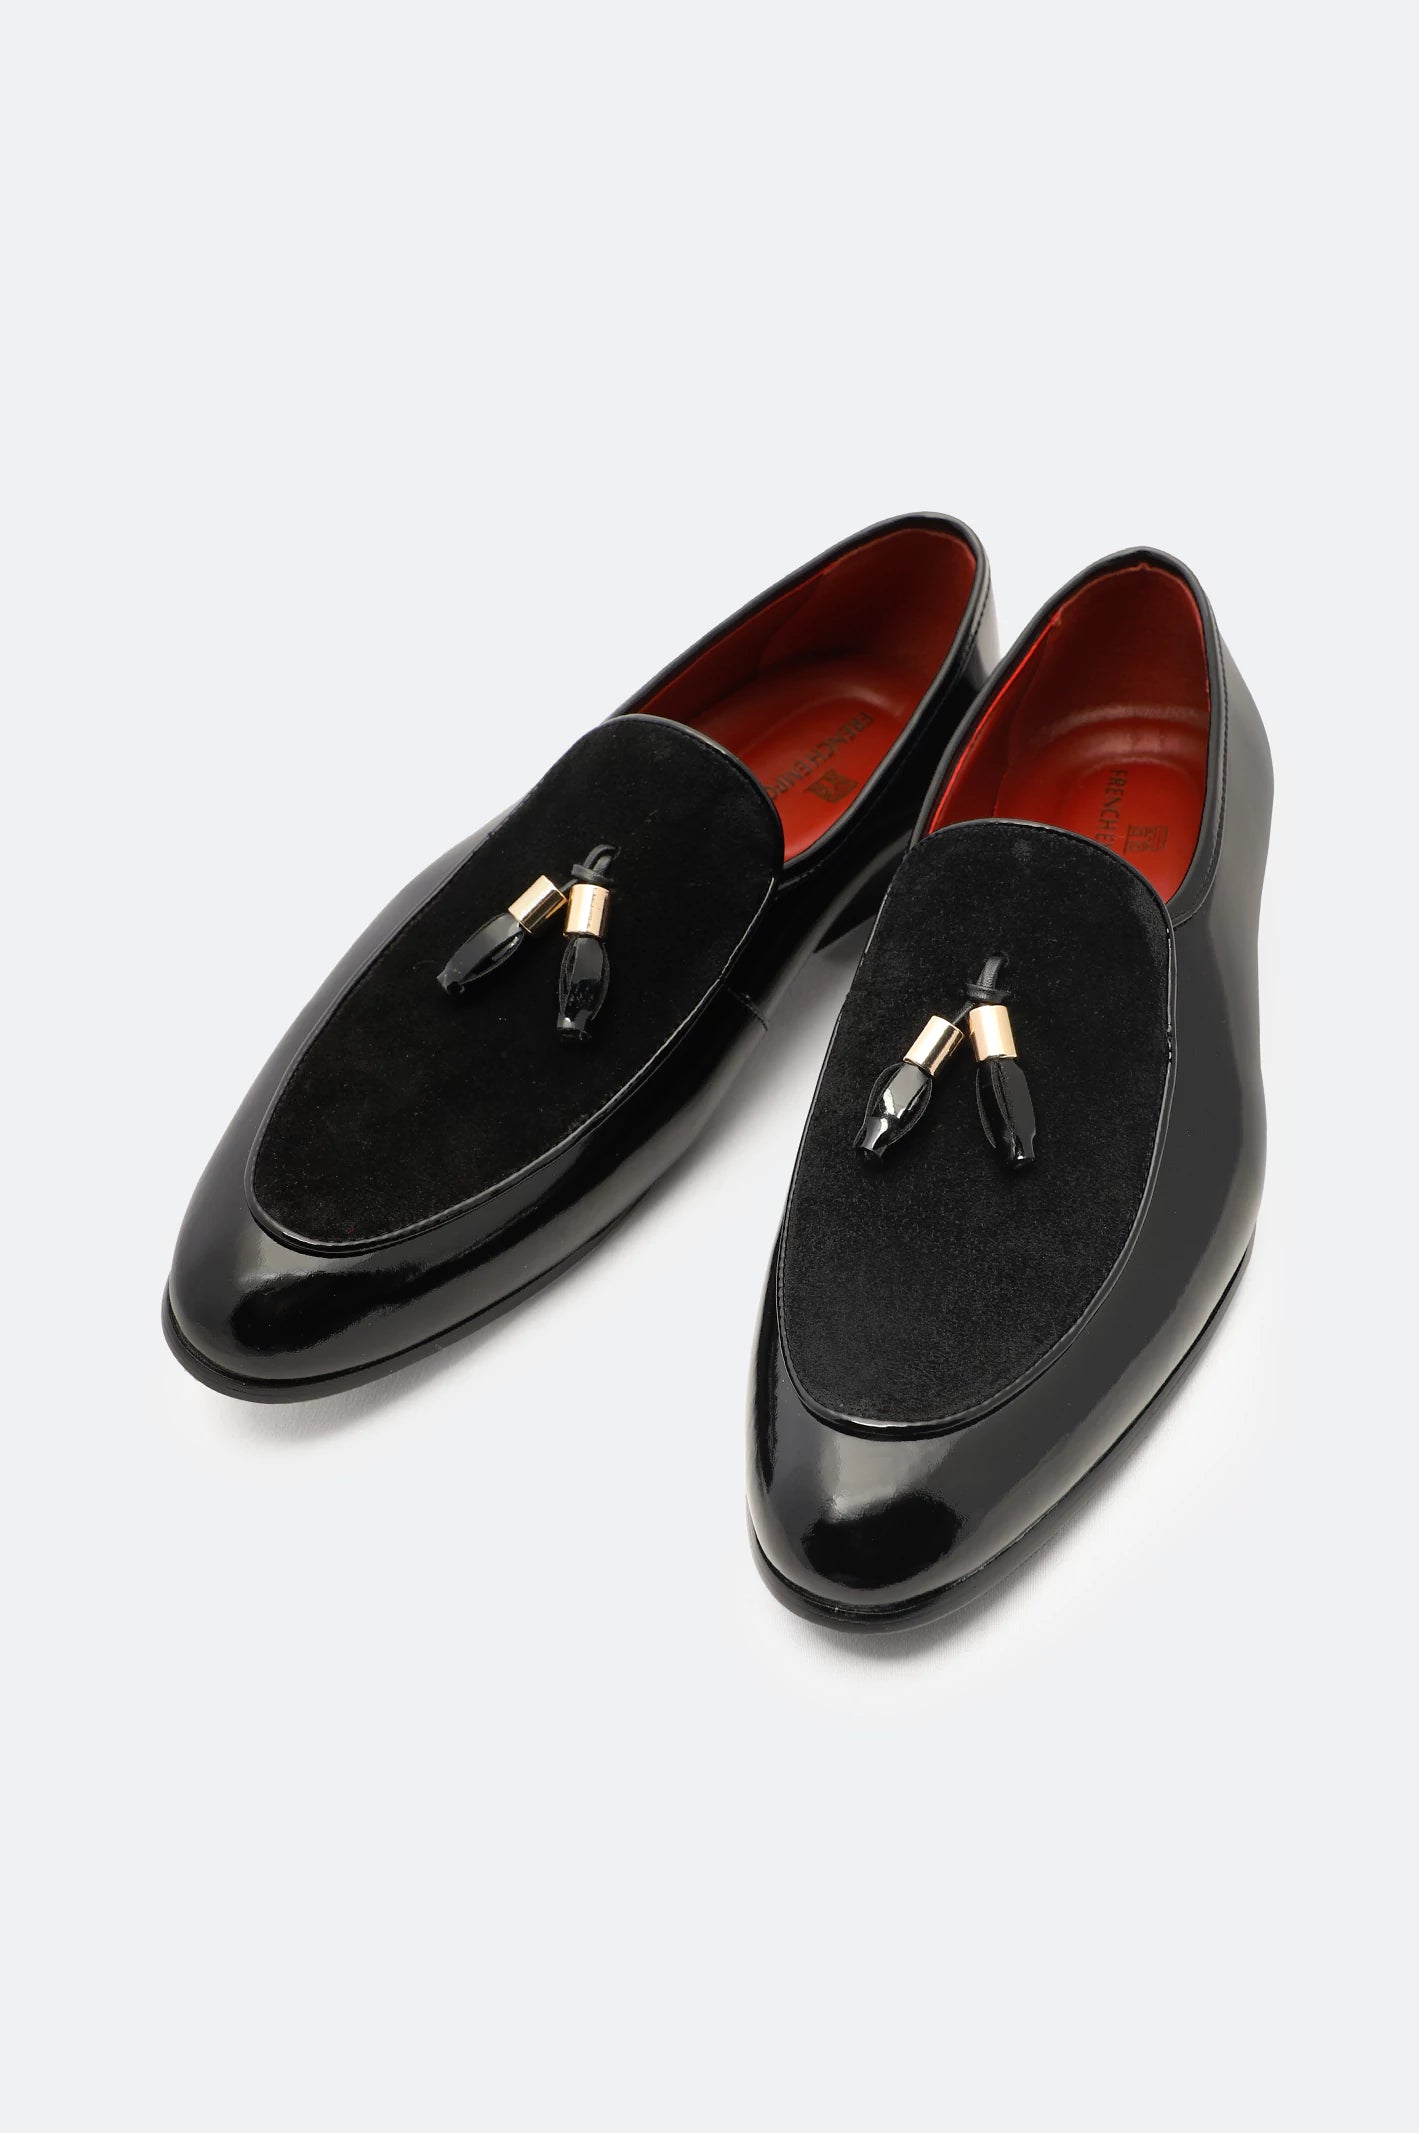 Premium Black Formal Shoes From Diners